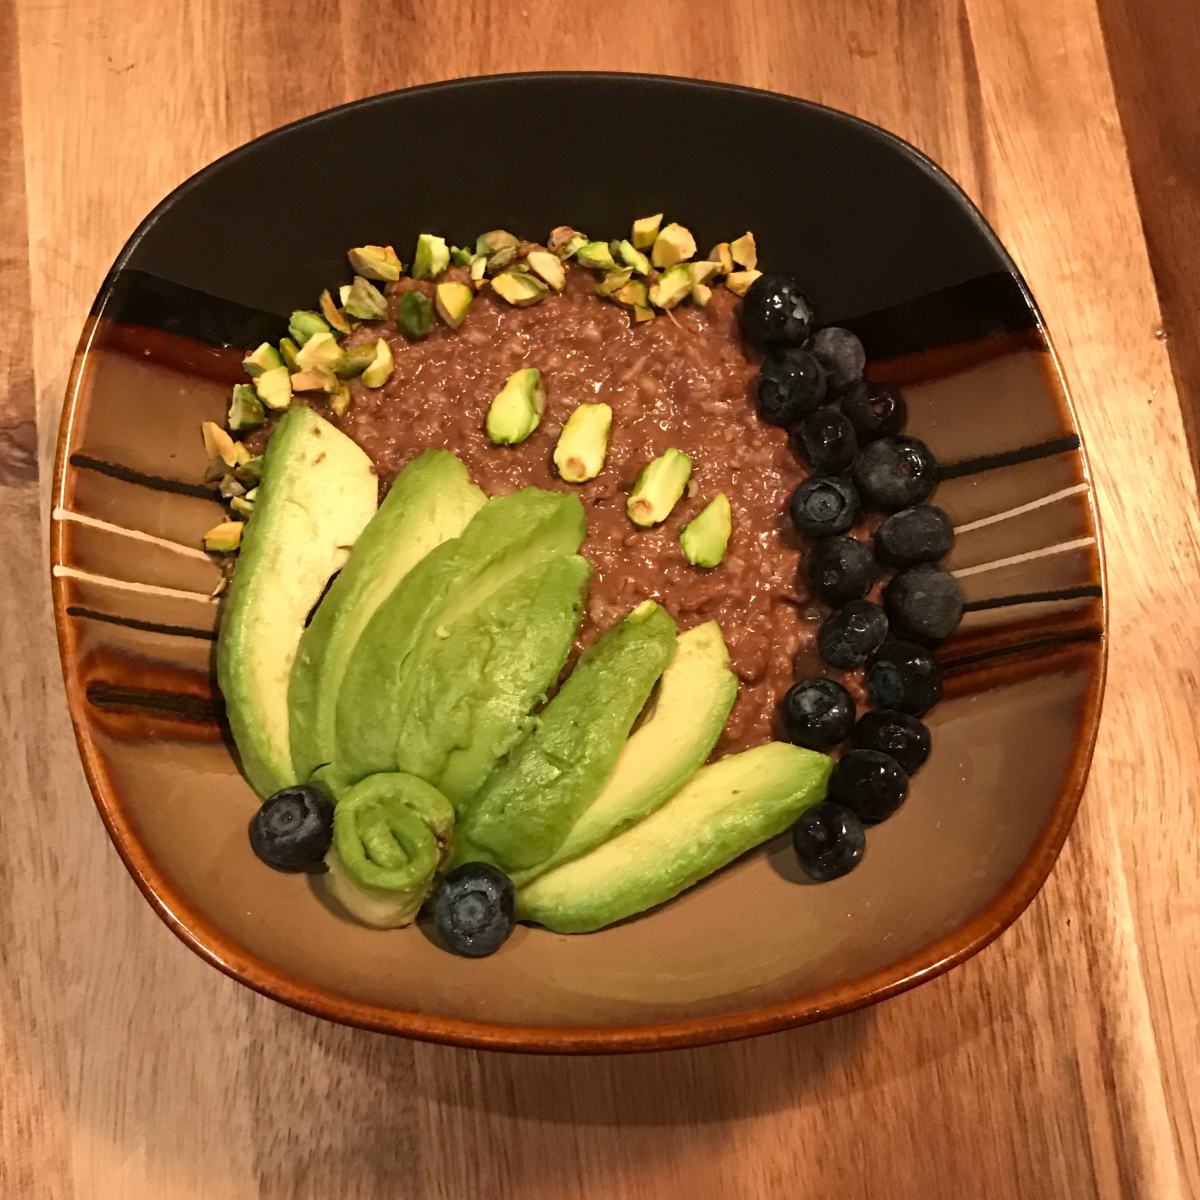 Chocolate oatmeal with pistachios, blueberries and avocado